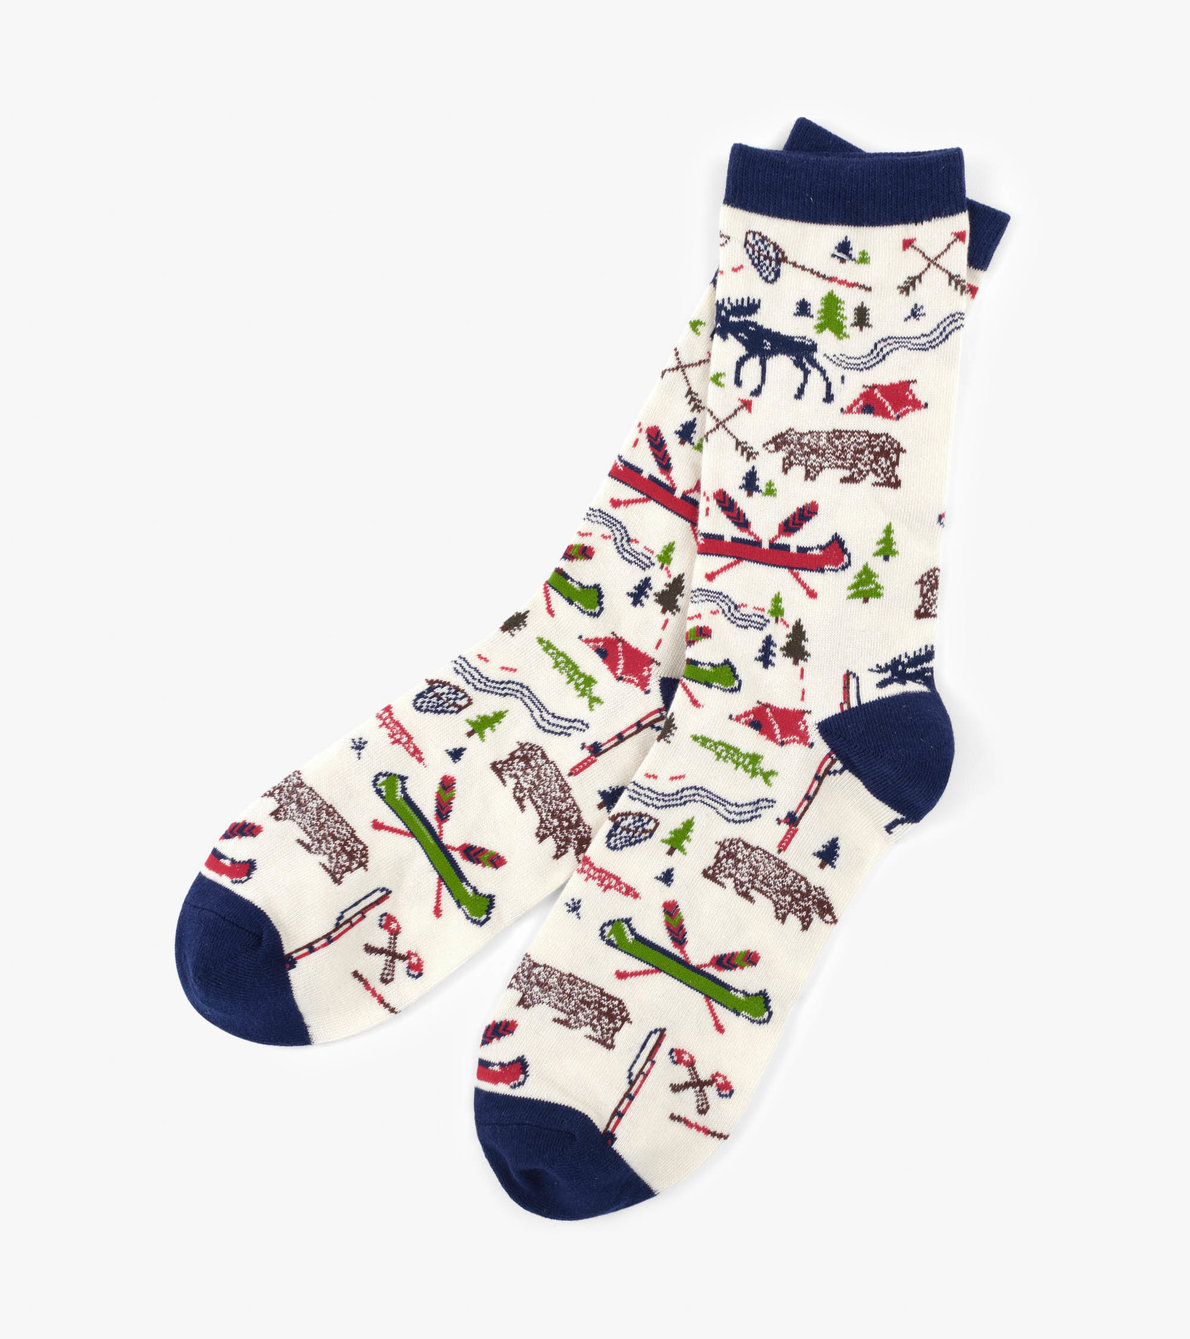 View larger image of Sketch Country Men's Crew Socks